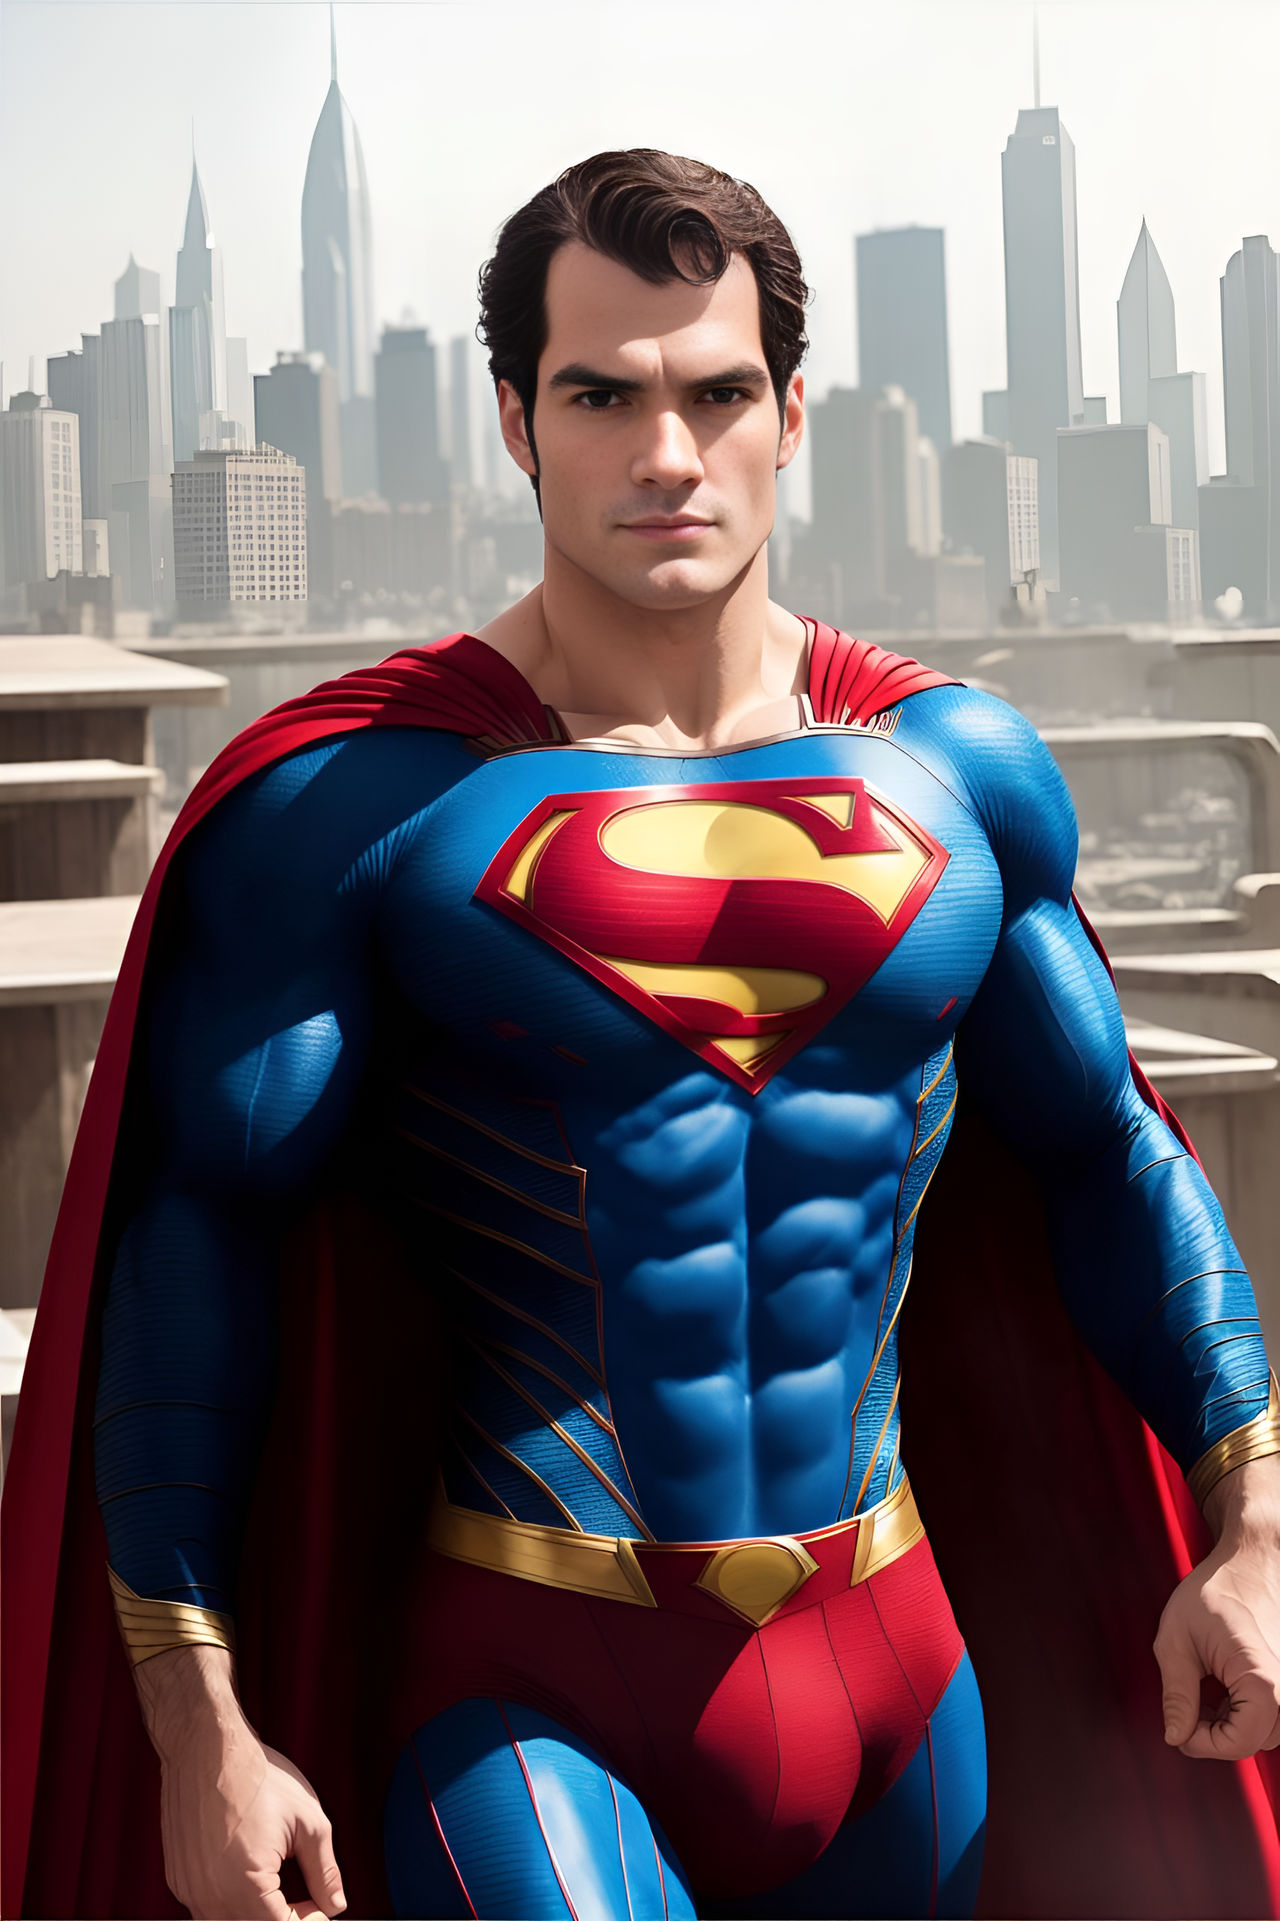 Cavill's Superman (Underwear Over Pants) by CristianoRohling on